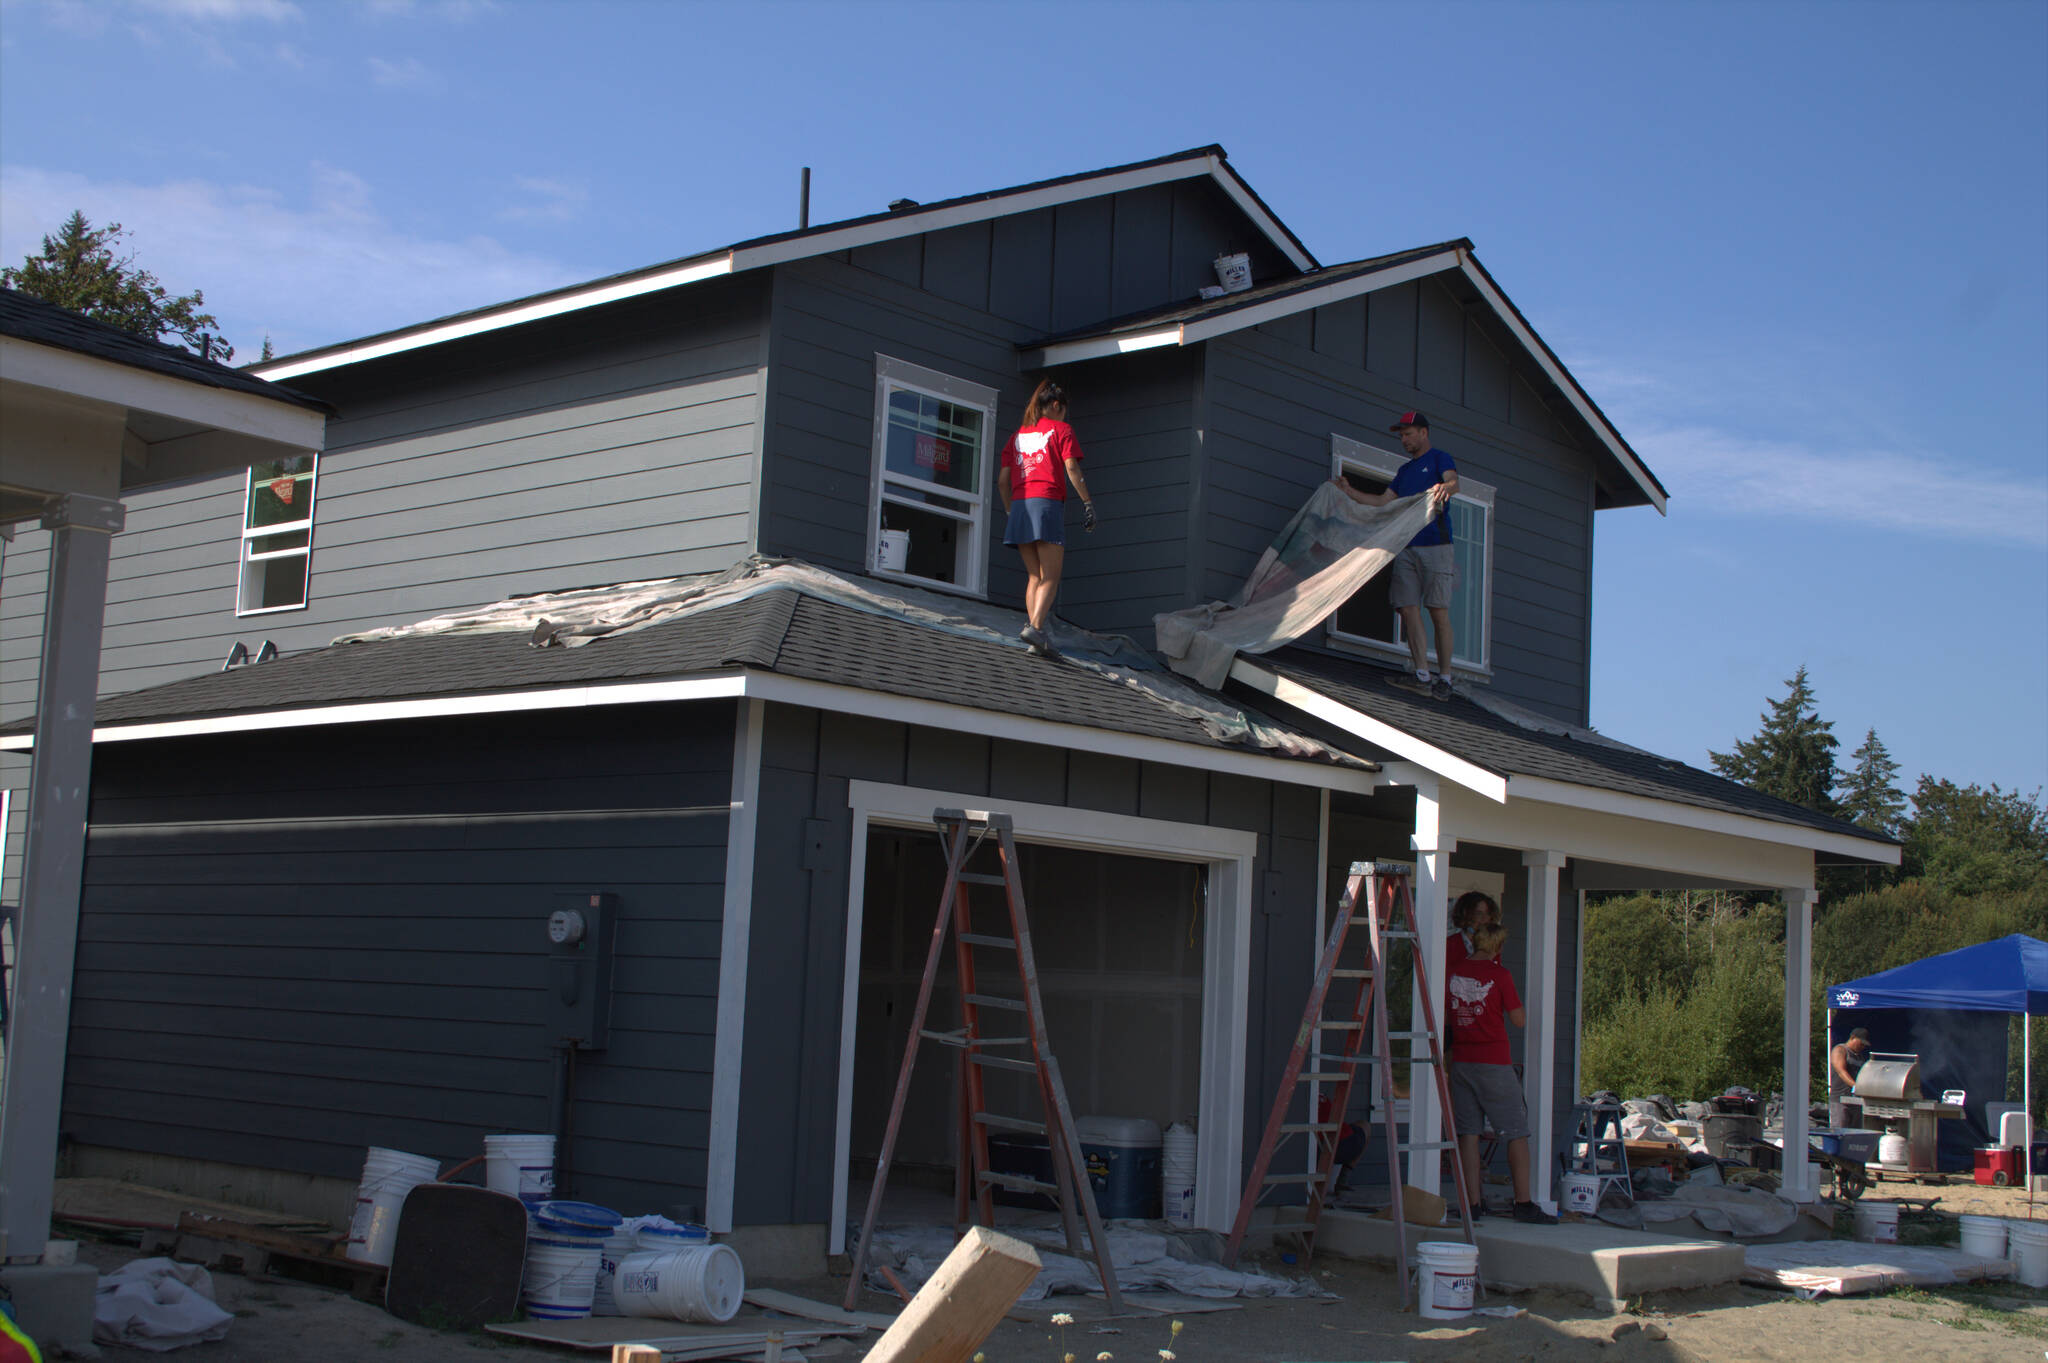 Volunteers continue work on one of the houses in the Sherman Ridge community.